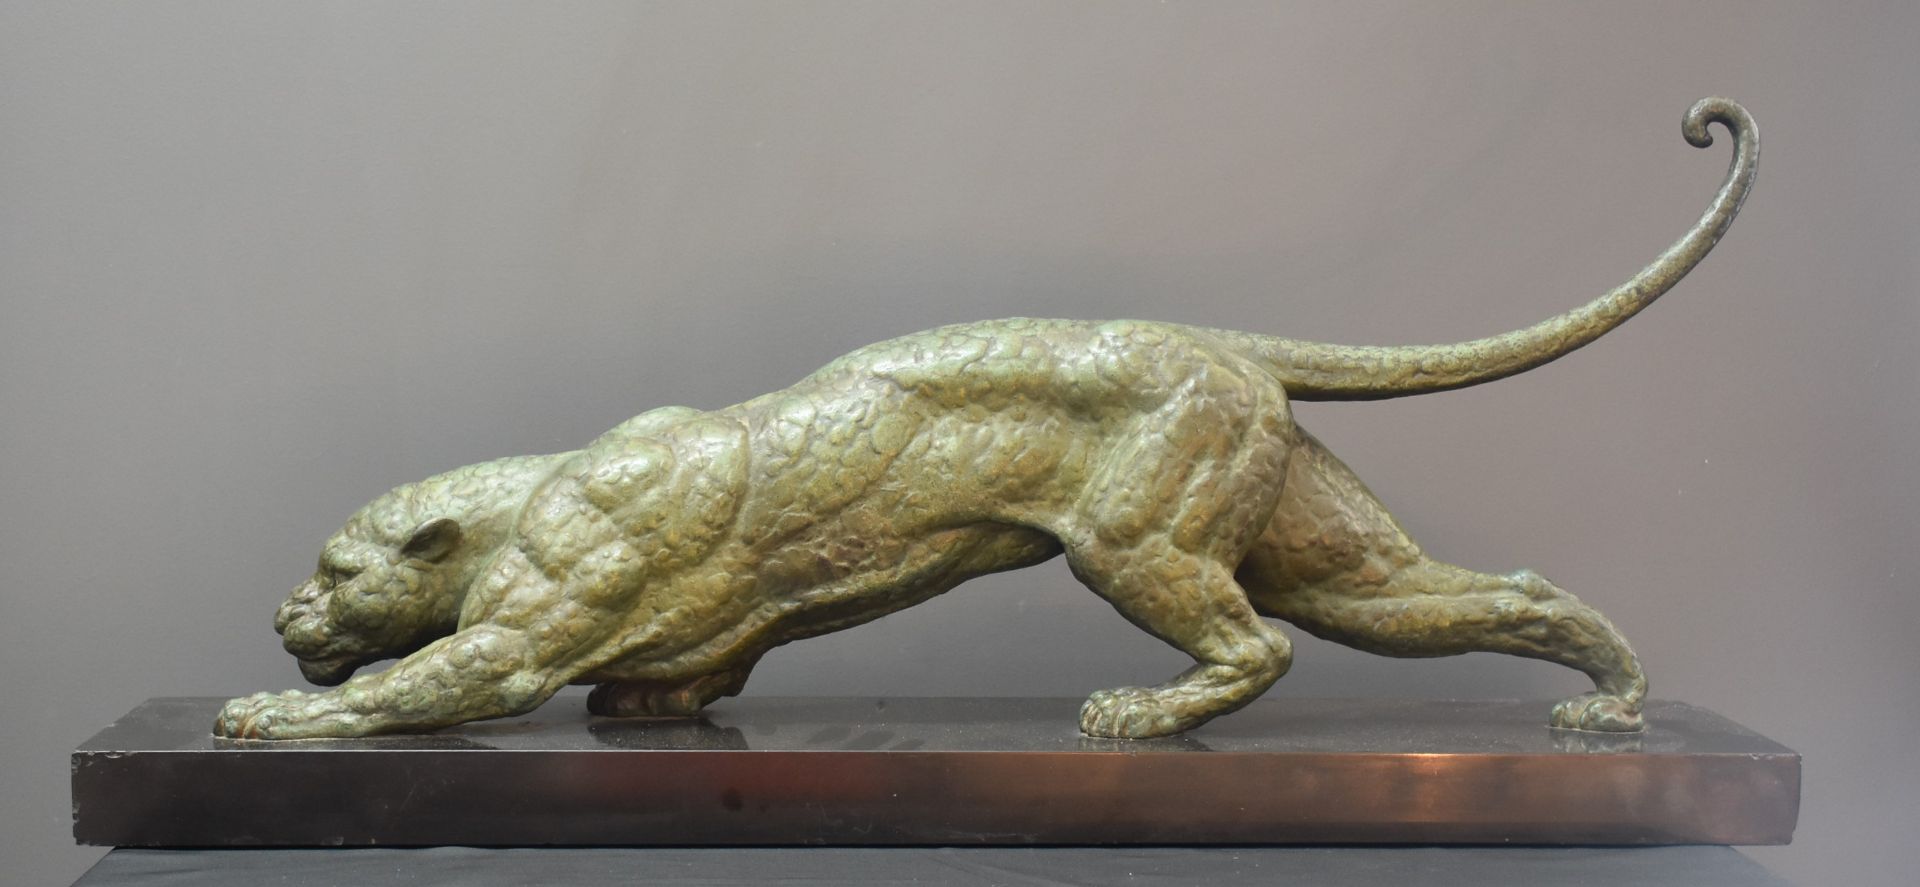 Demeter Halamb CHIPARUS (1886-1947). Panther. Regula with green patina on black marble. Signed on